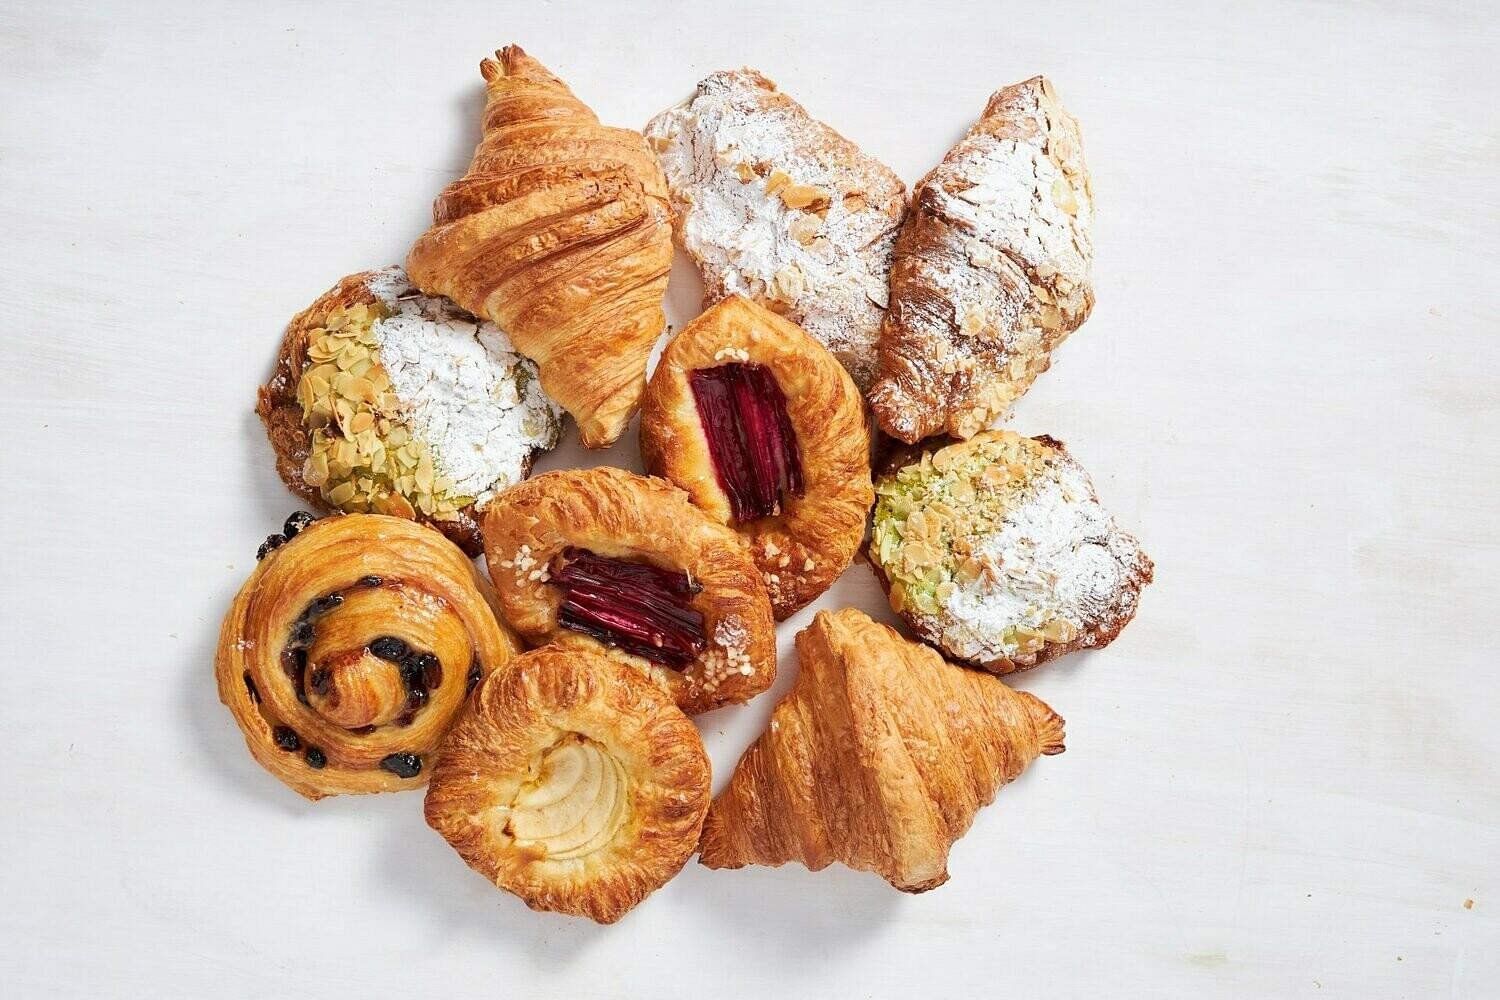 Assorted Pastries (6 Pax)